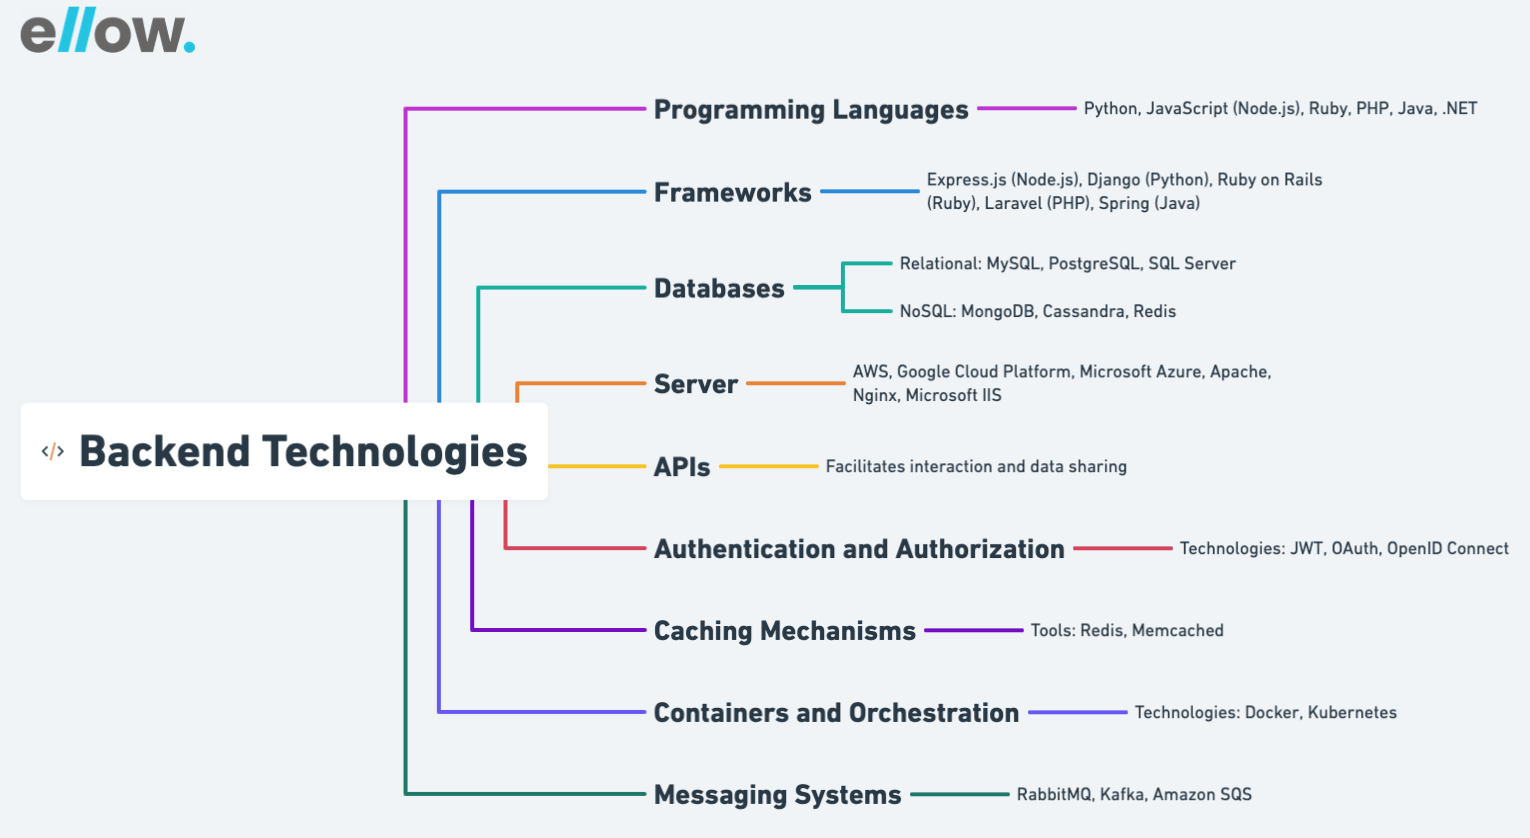 Backend Technologies Overview